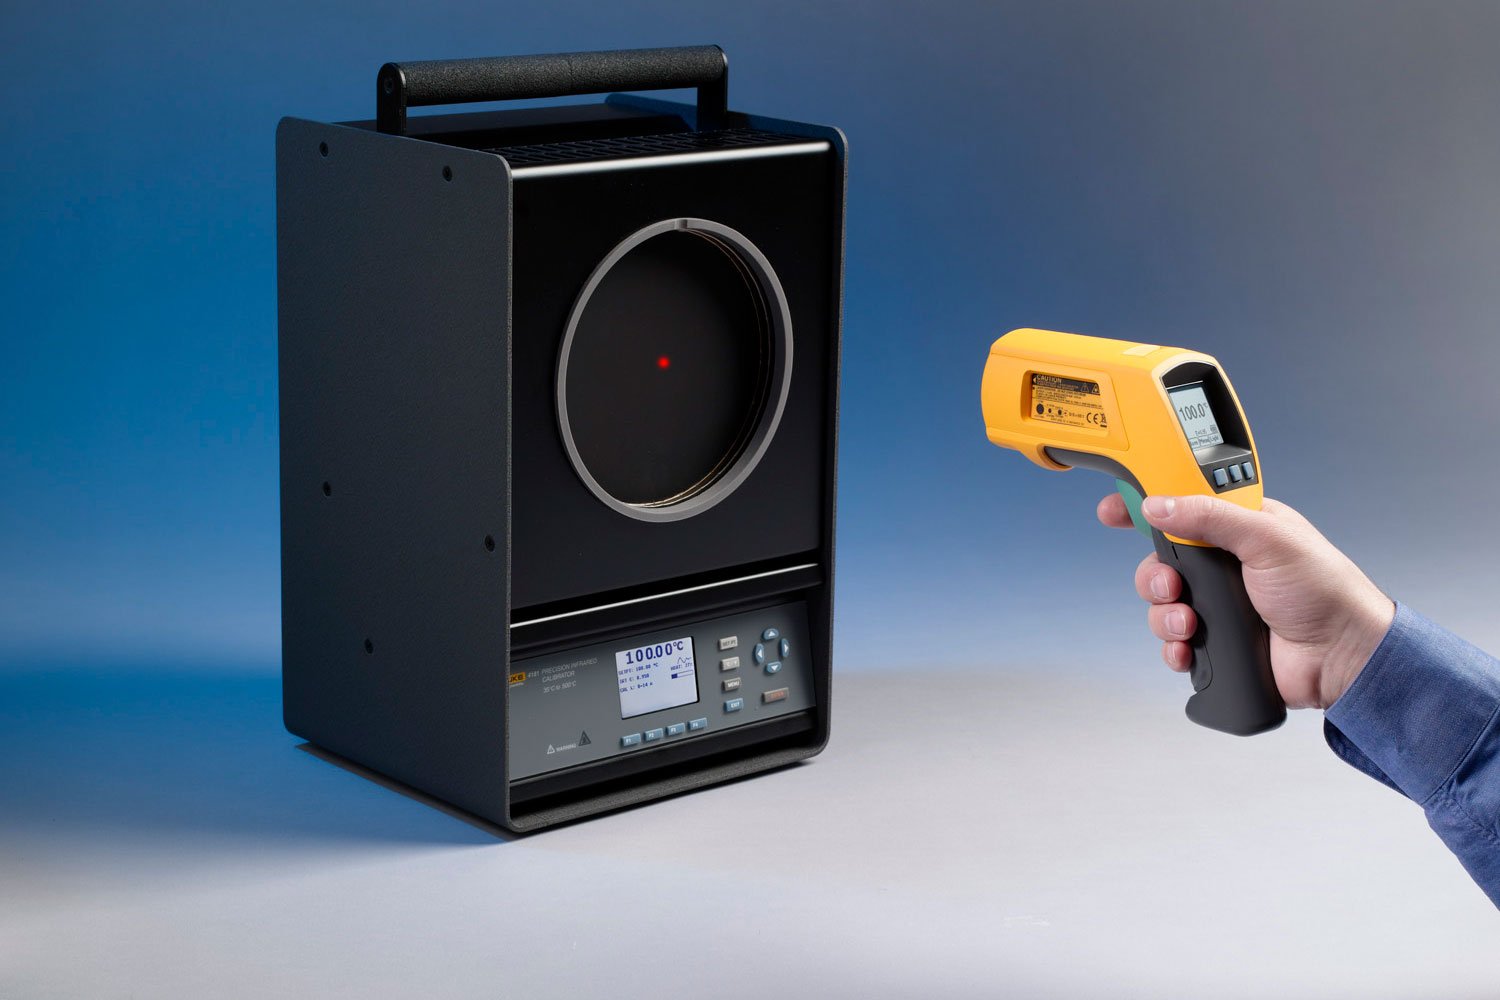 Fluke Calibration 4181 Precision Infrared Calibrators are calibrated radiometrically for meaningful, consistent results.